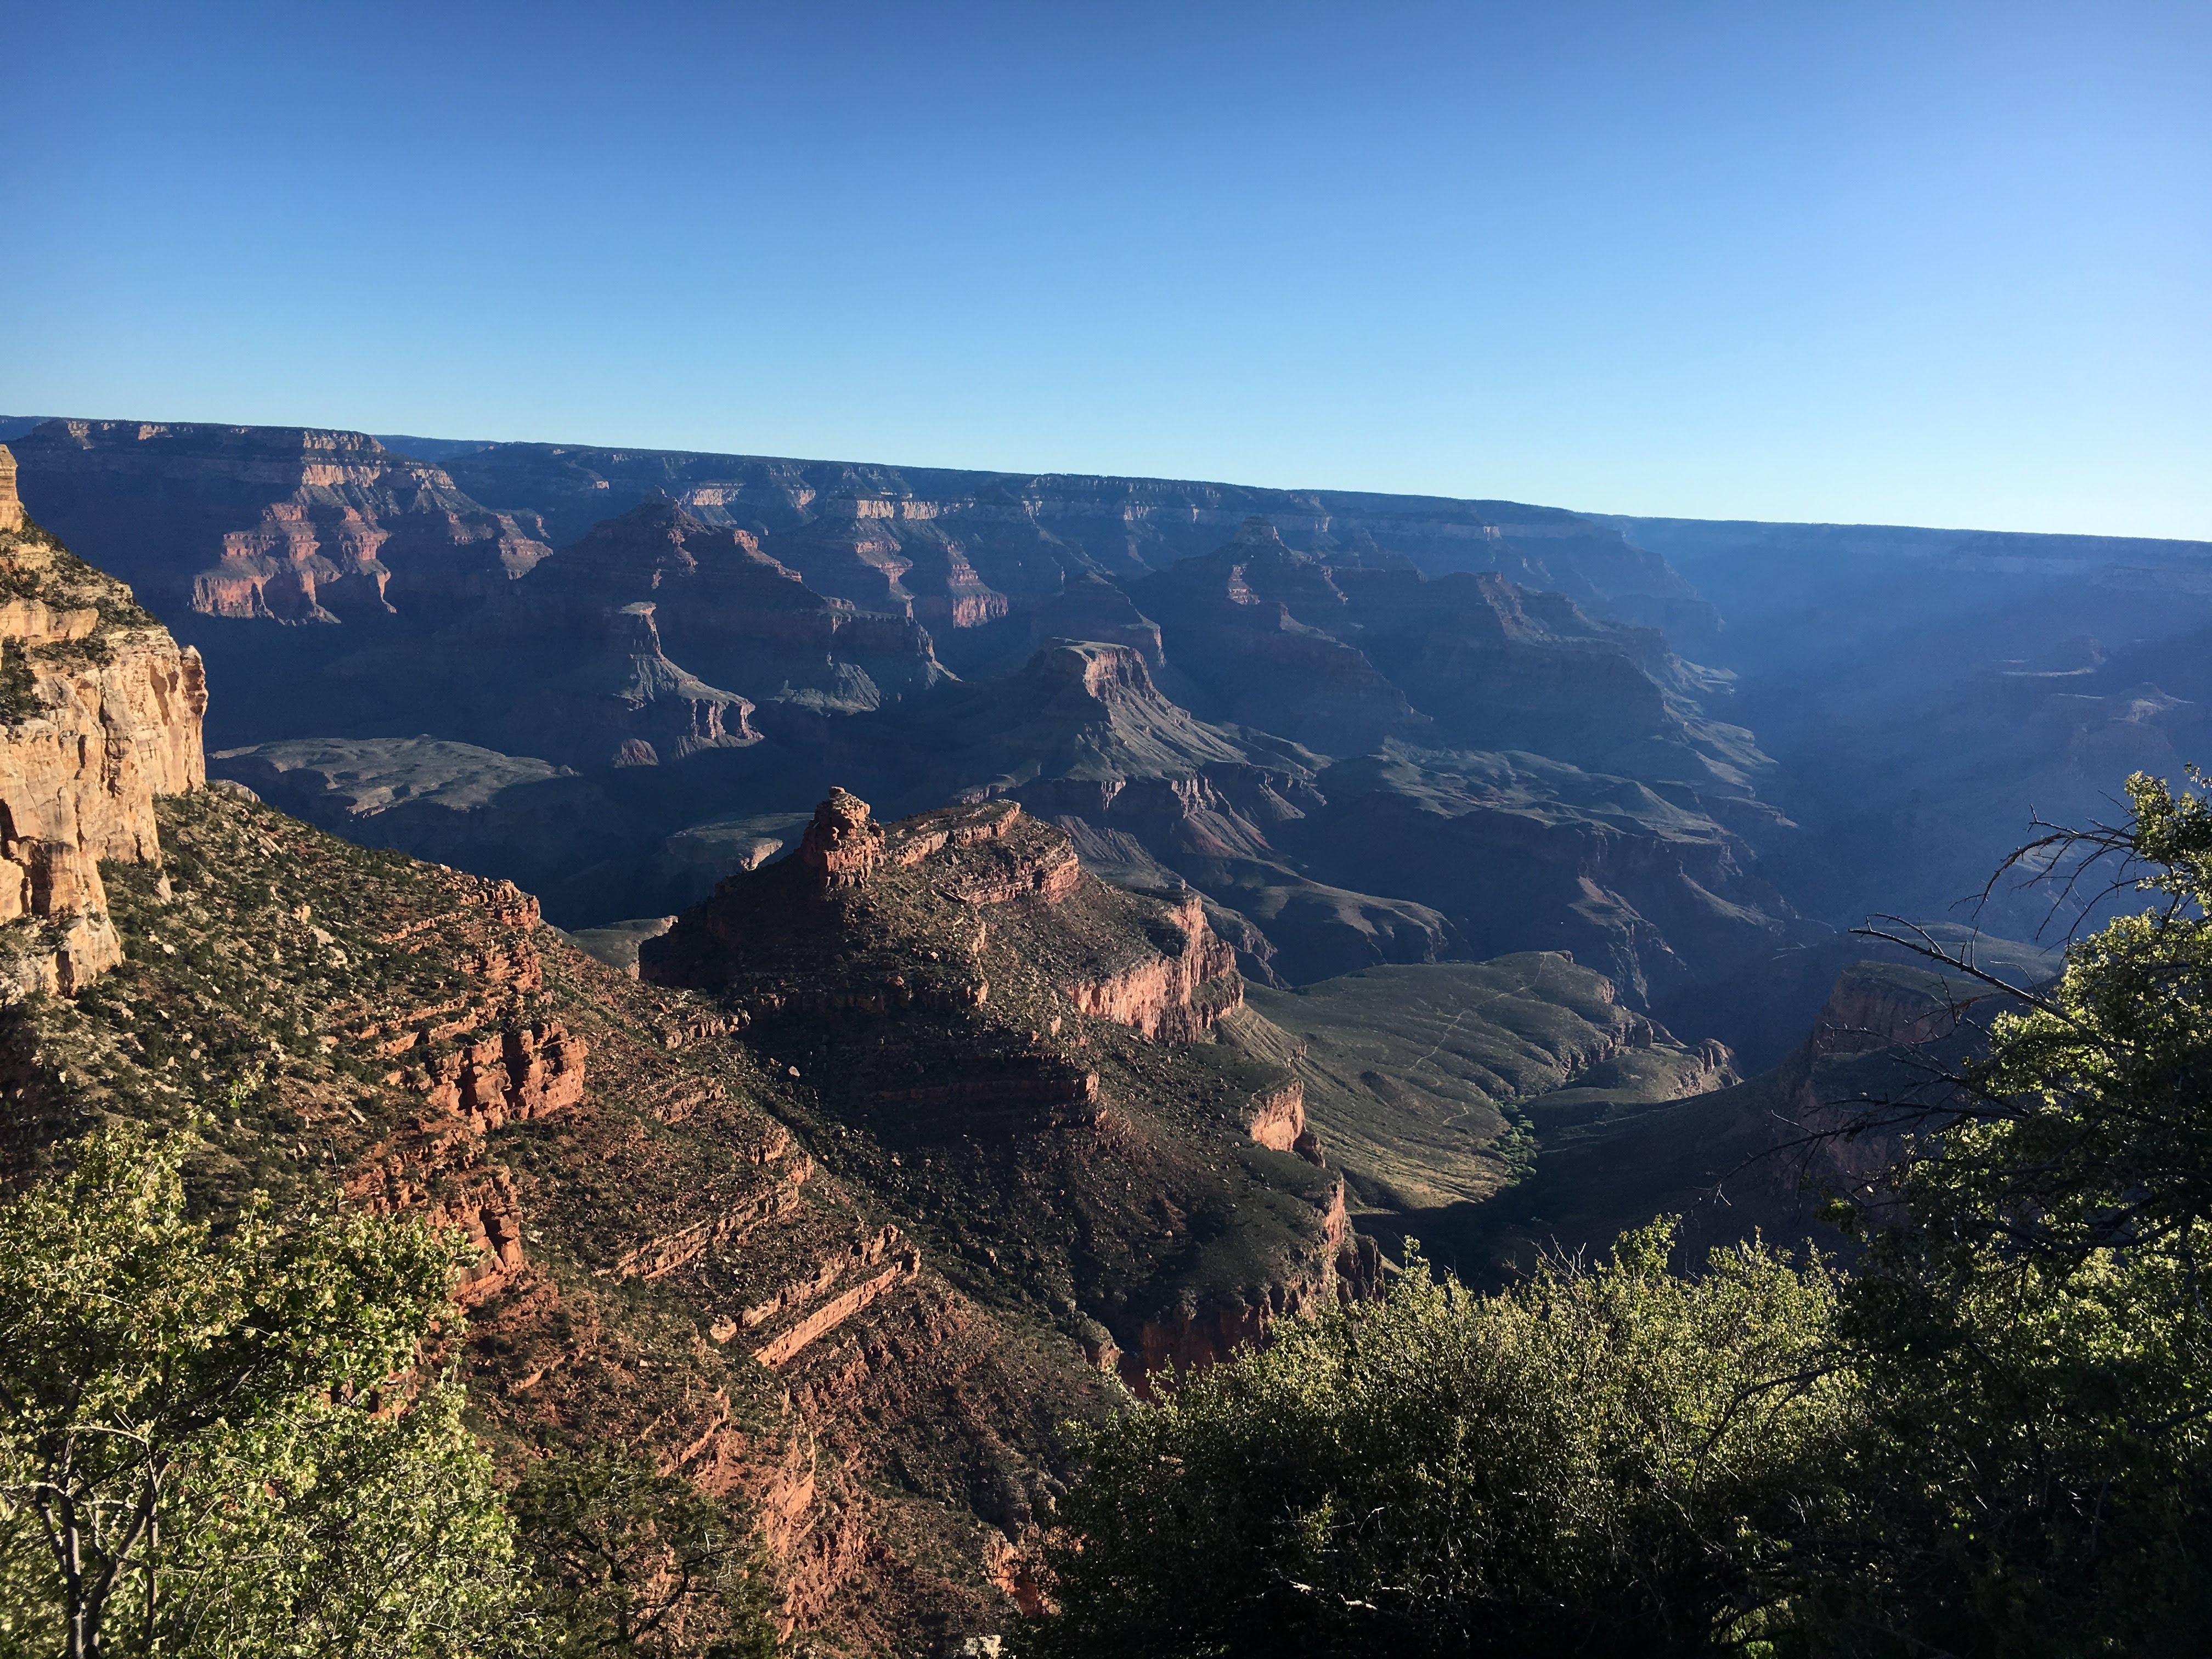 An early morning start to a long hike in The Grand Canyon